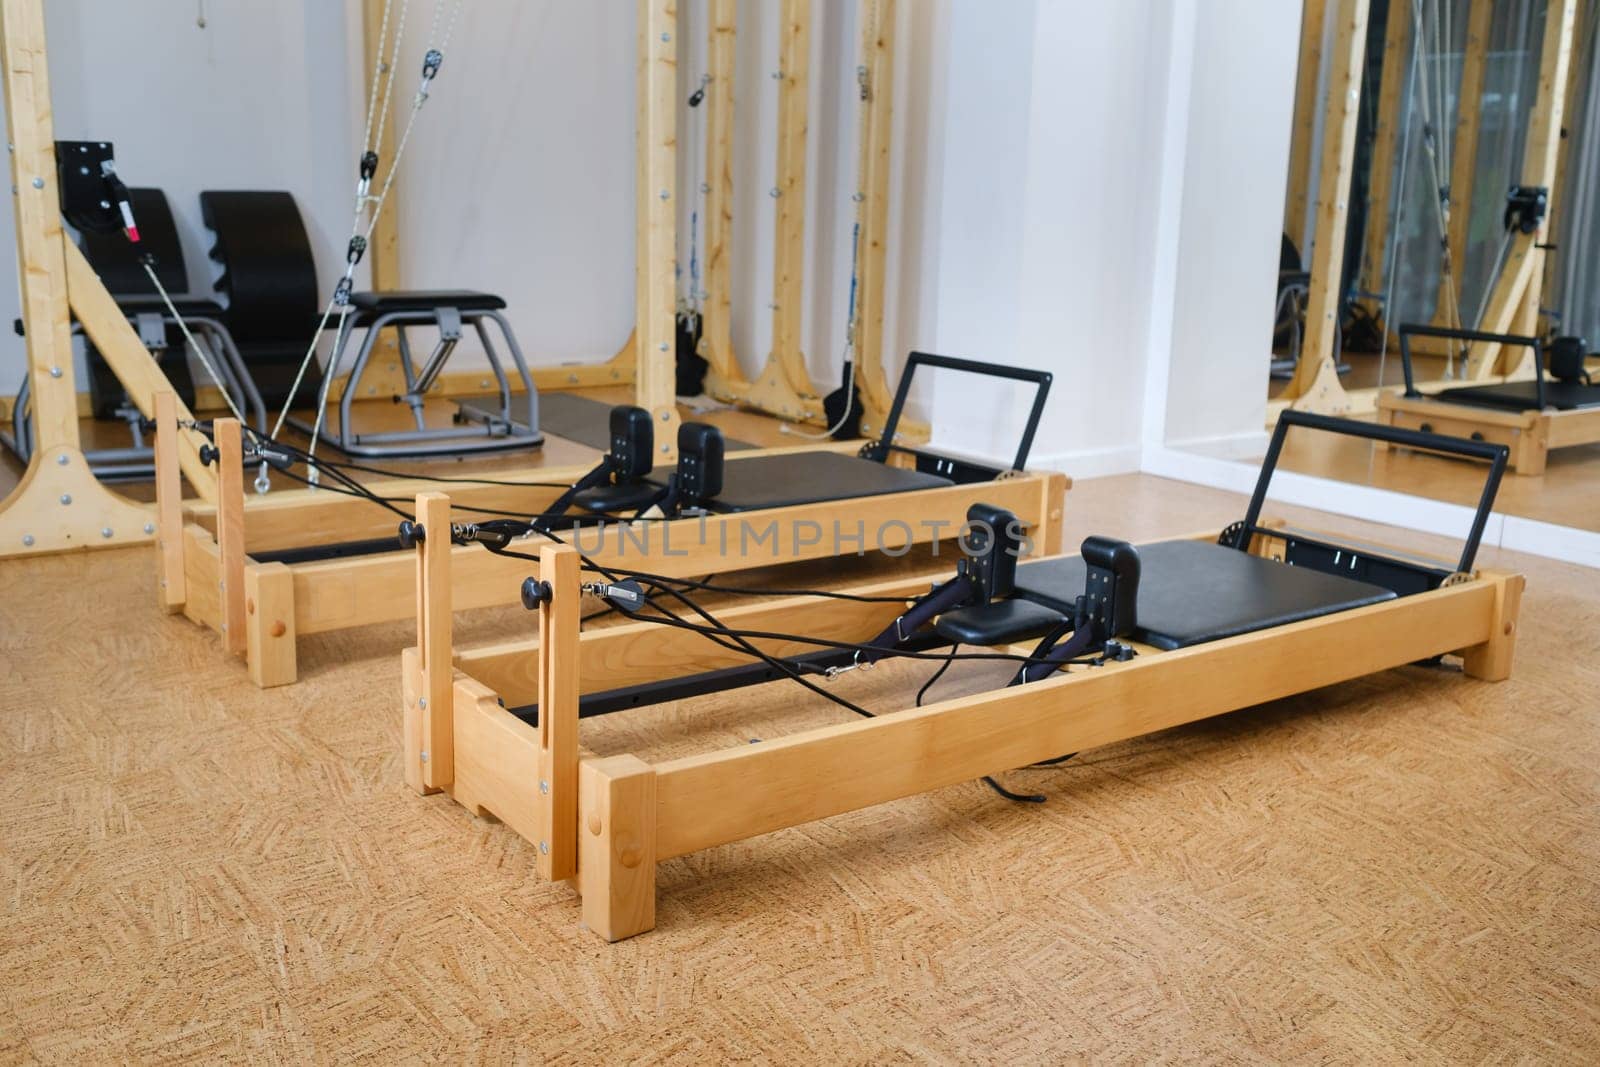 the reformer machine in the pilates room. Yoga equipment.